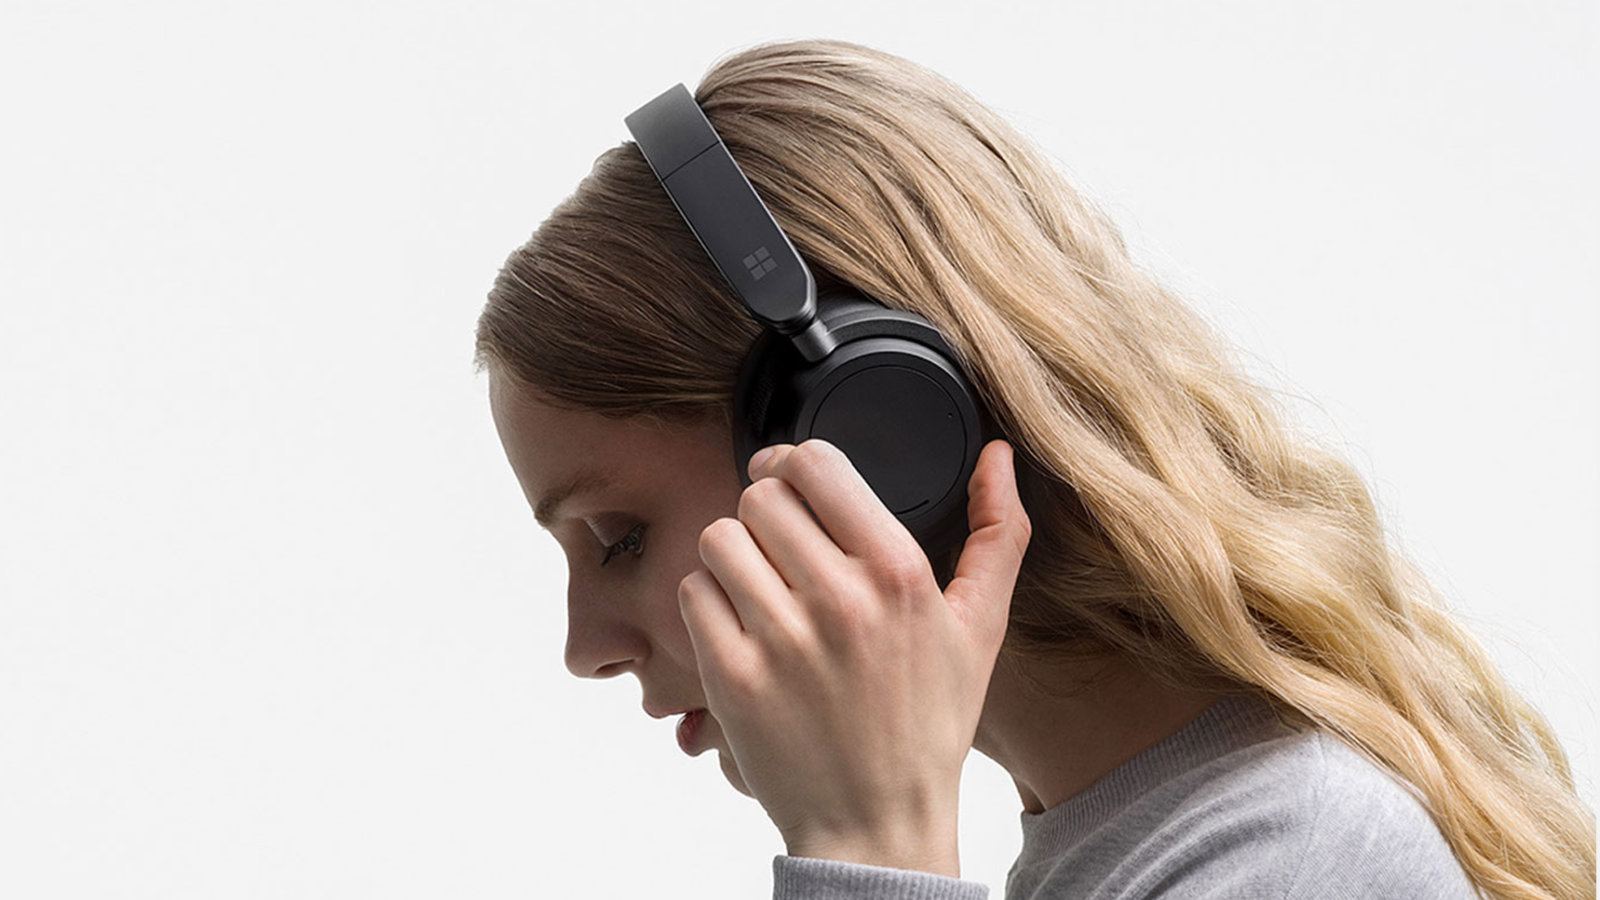 A person is shown wearing Surface Headphones 2